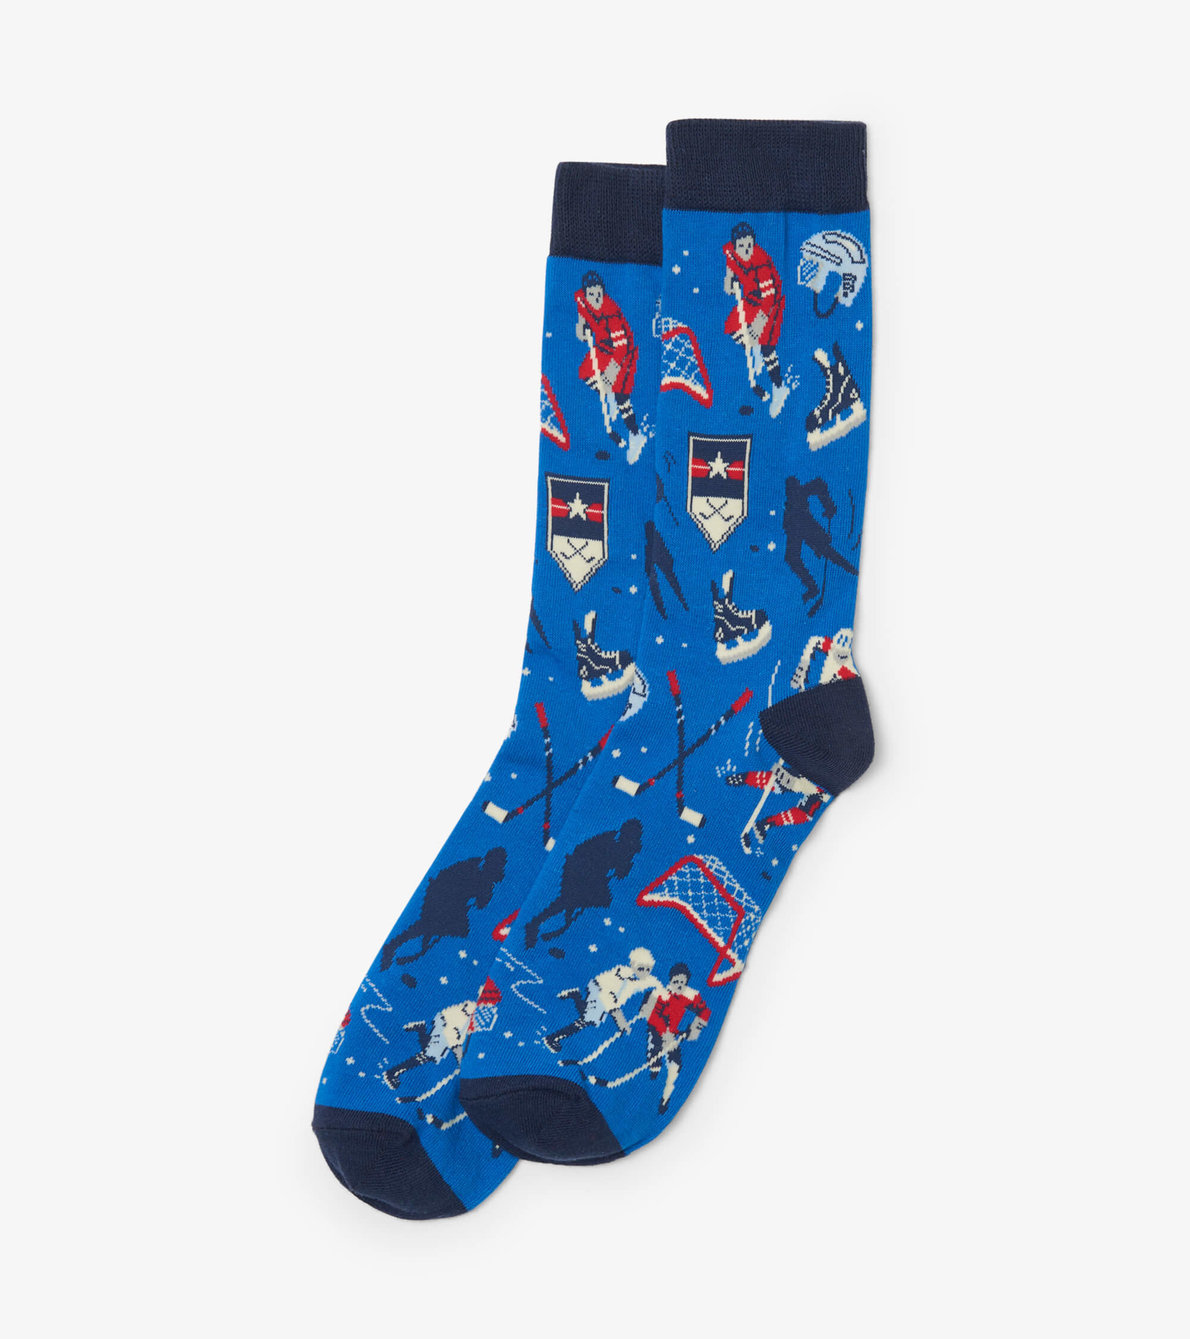 View larger image of Hockey Champs Men's Crew Socks